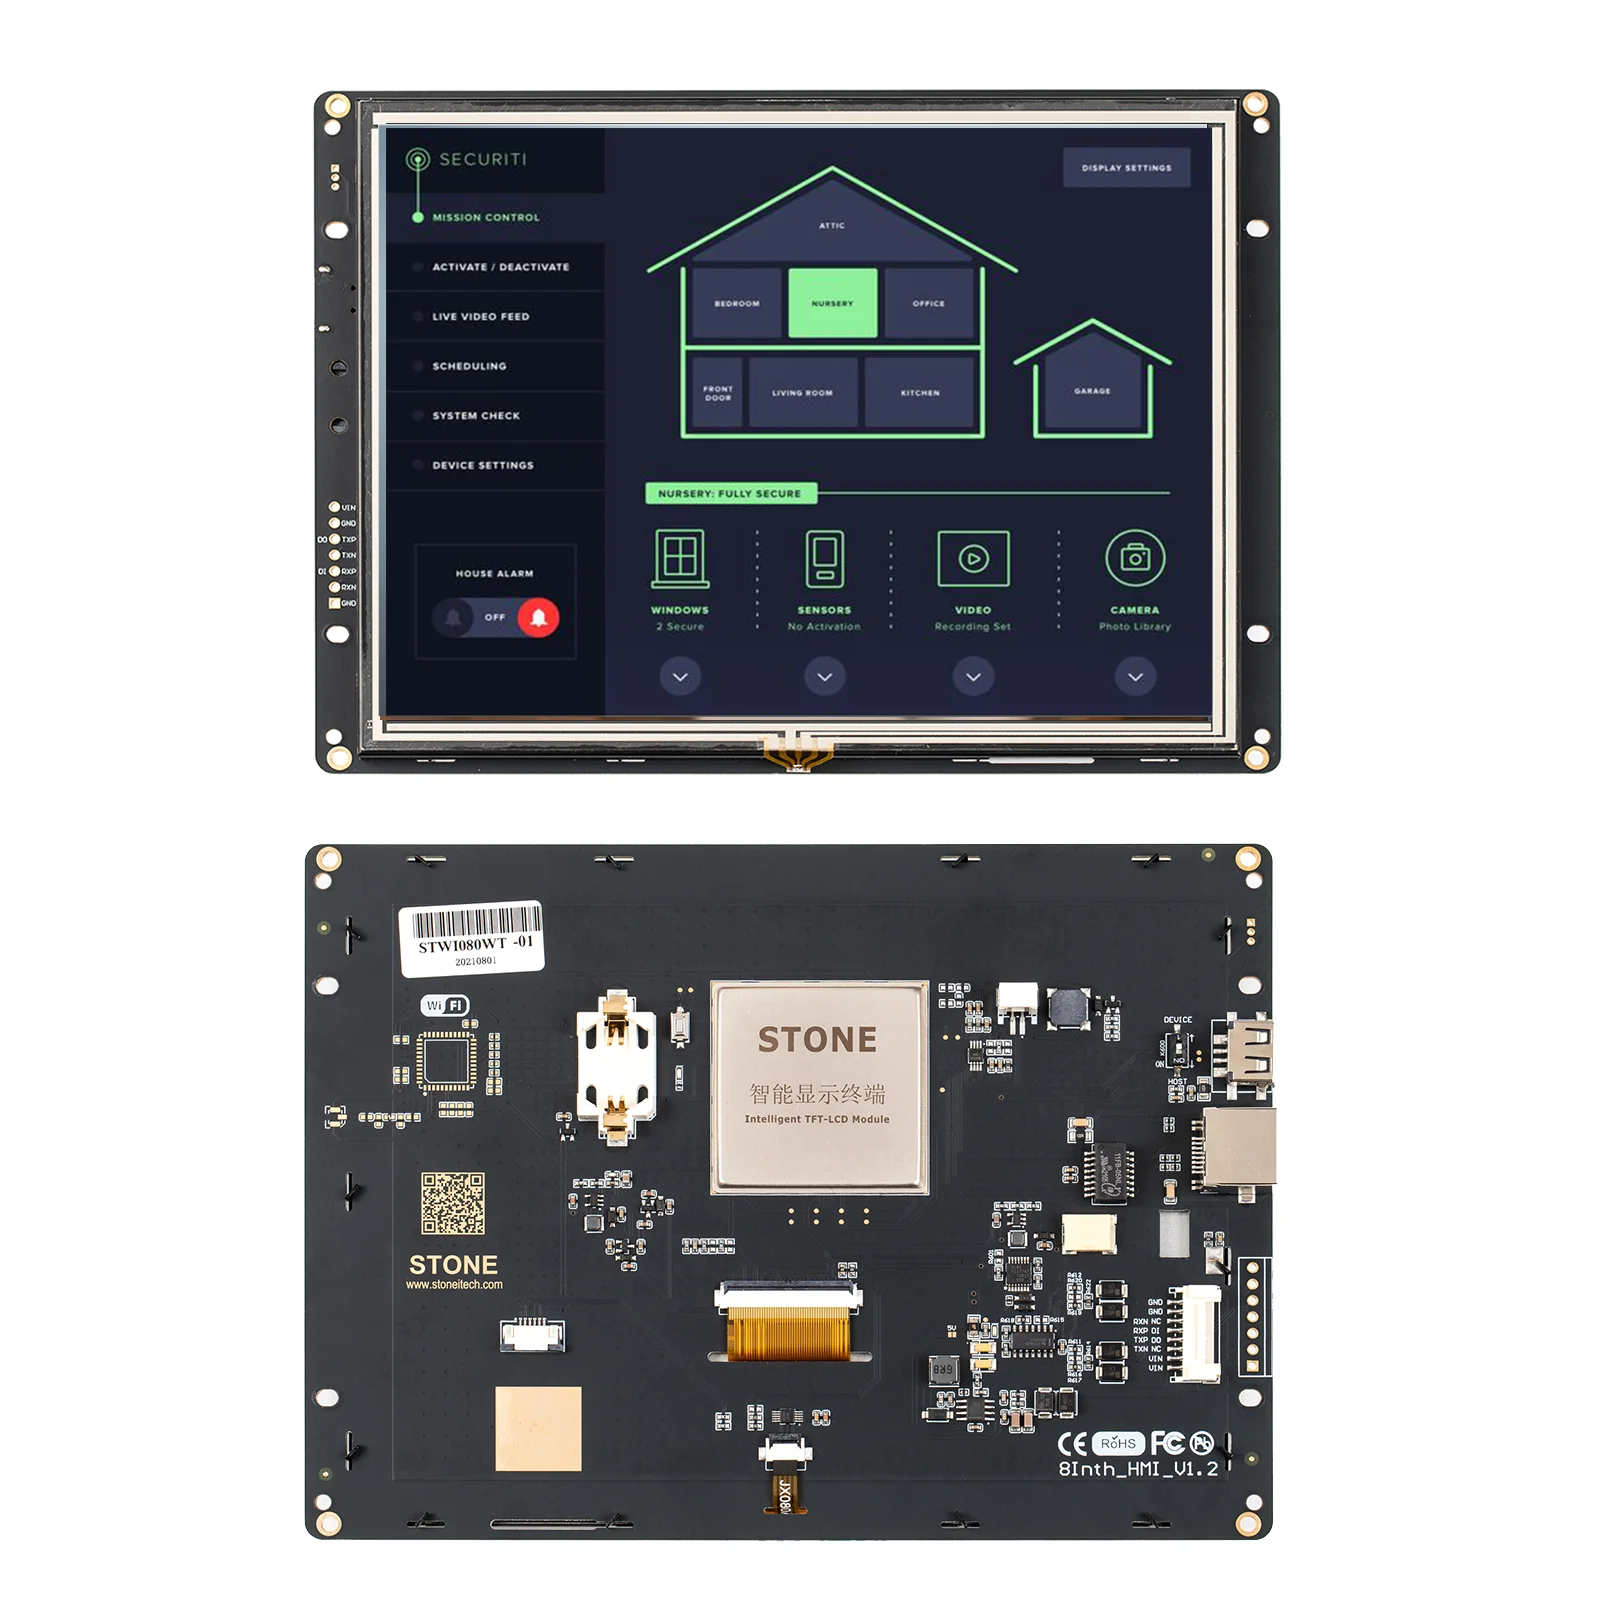 TFT LCD touch screen module with CPU &rs232 interface 8 inch